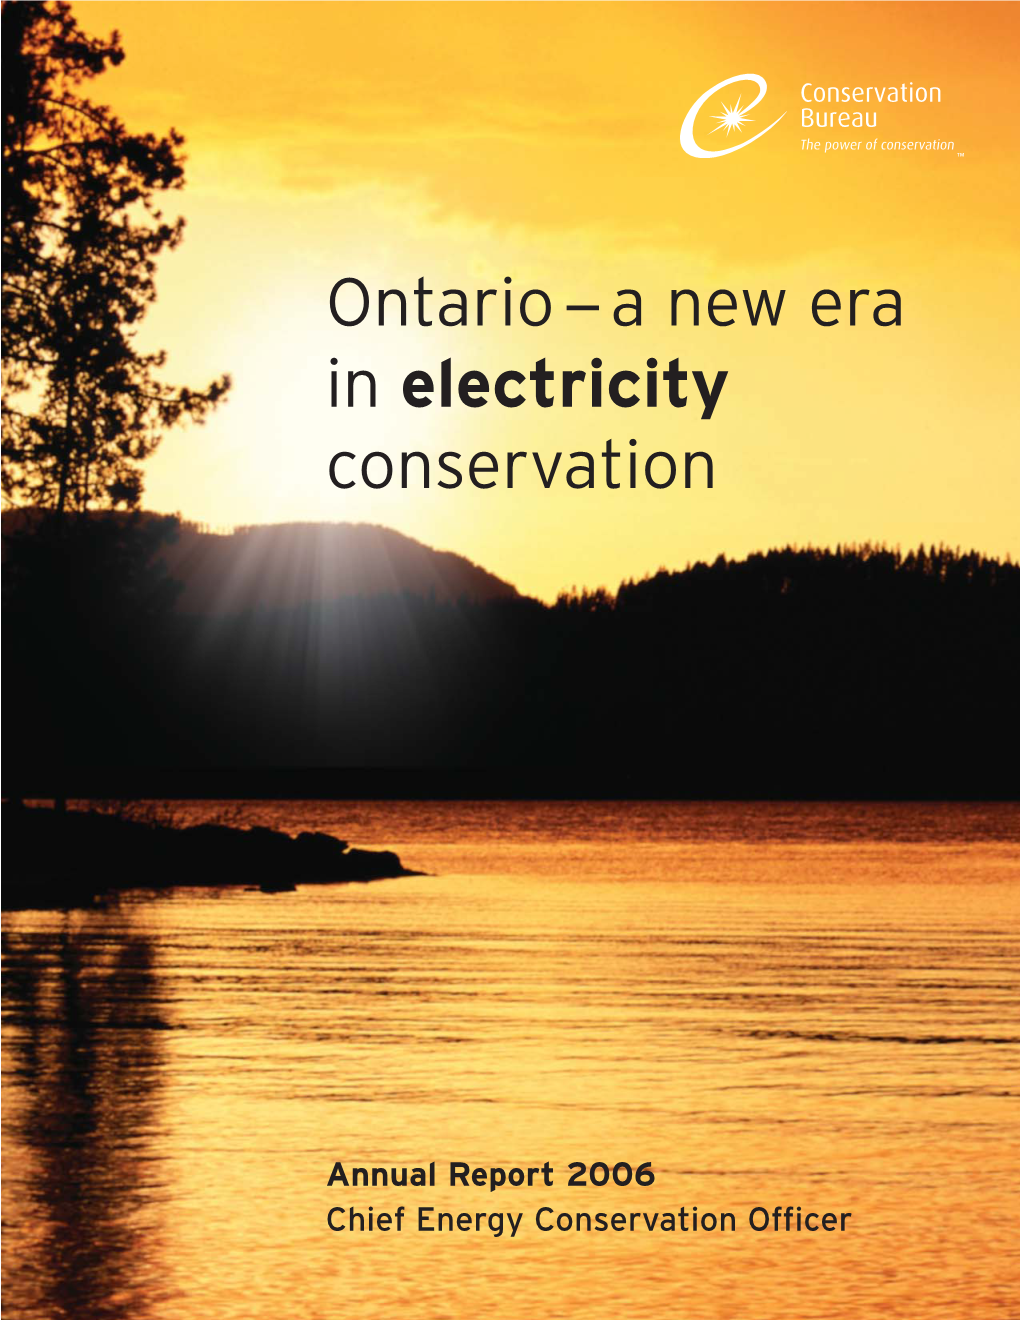 Ontario—A New Era in Electricity Conservation